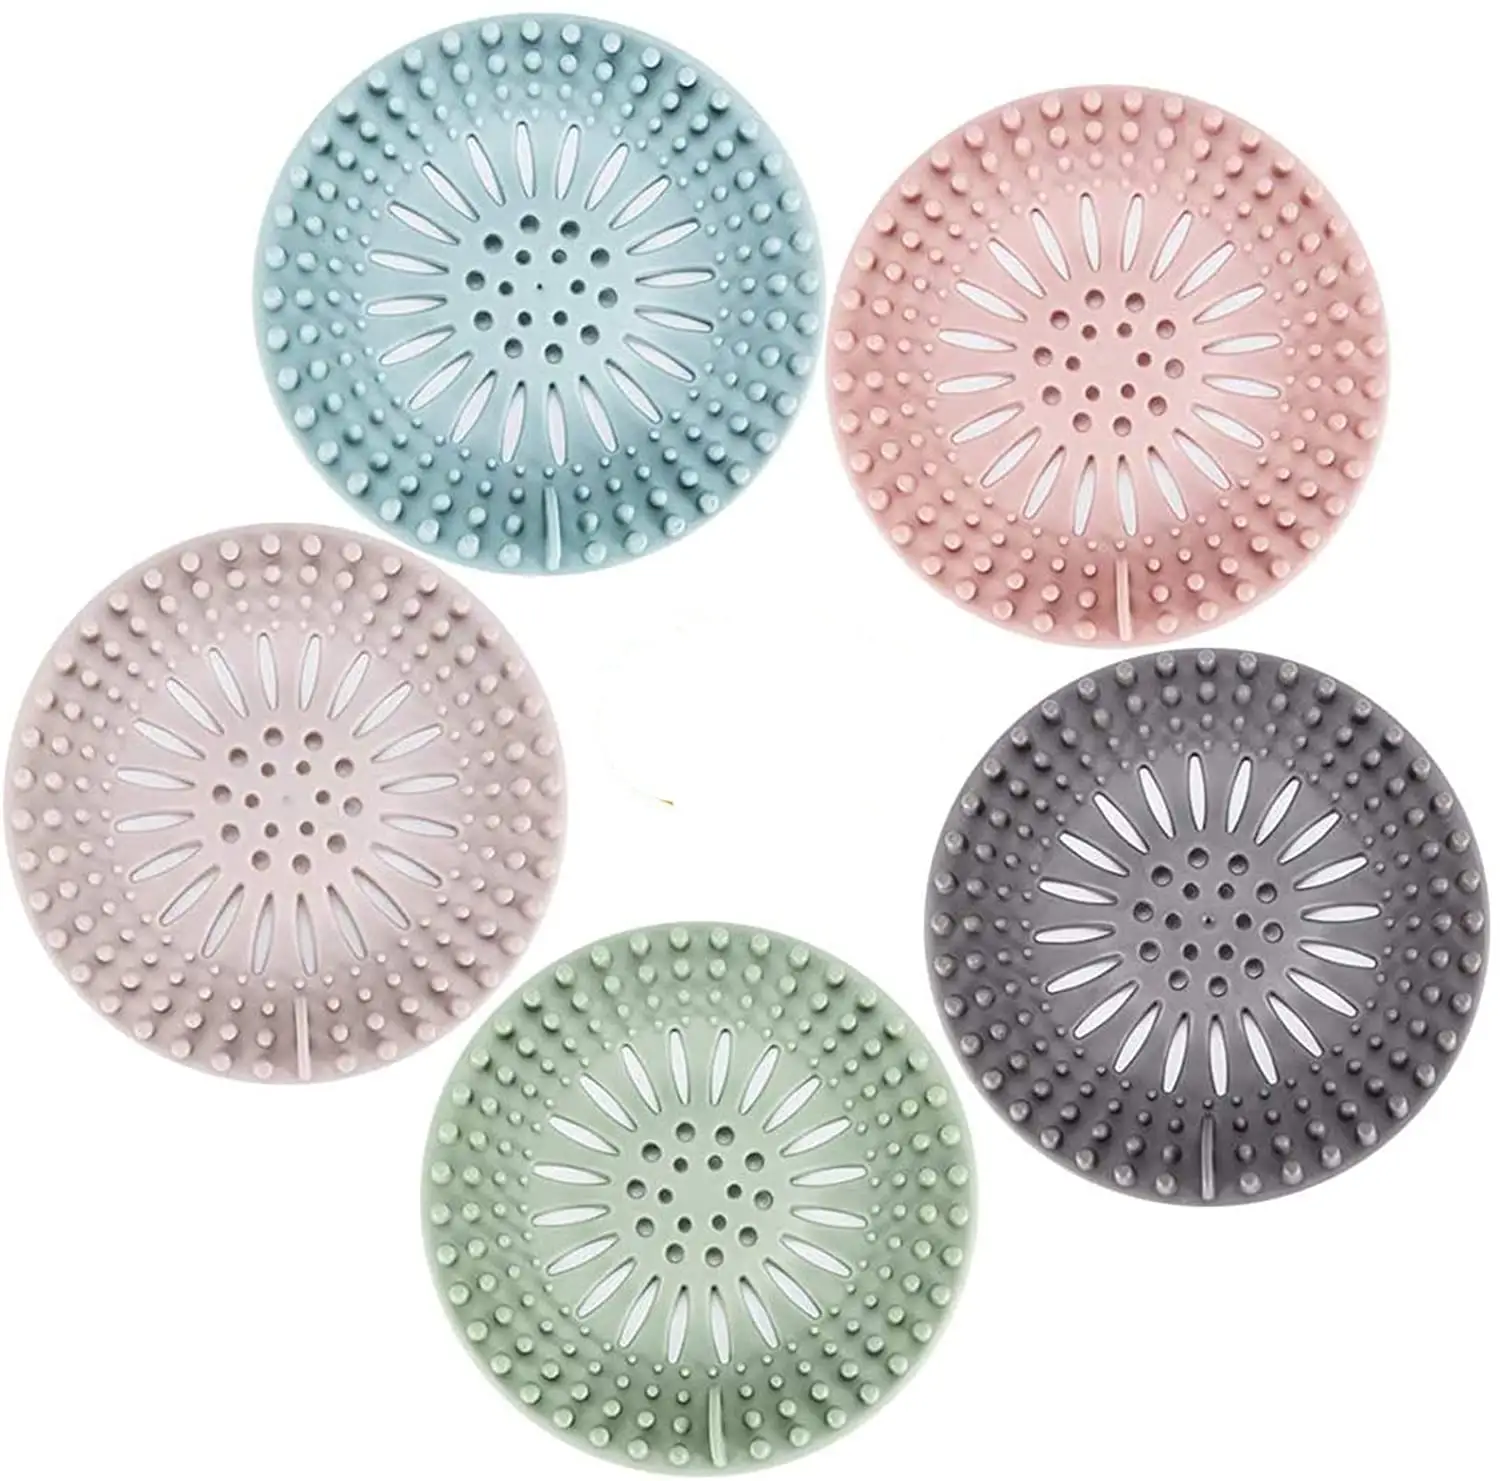 Amazon Hot Selling Kitchen Bathroom Floor Shower Drain Cover Strainer Silicone Hair Stopper Sink Strainers For Hair Catcher